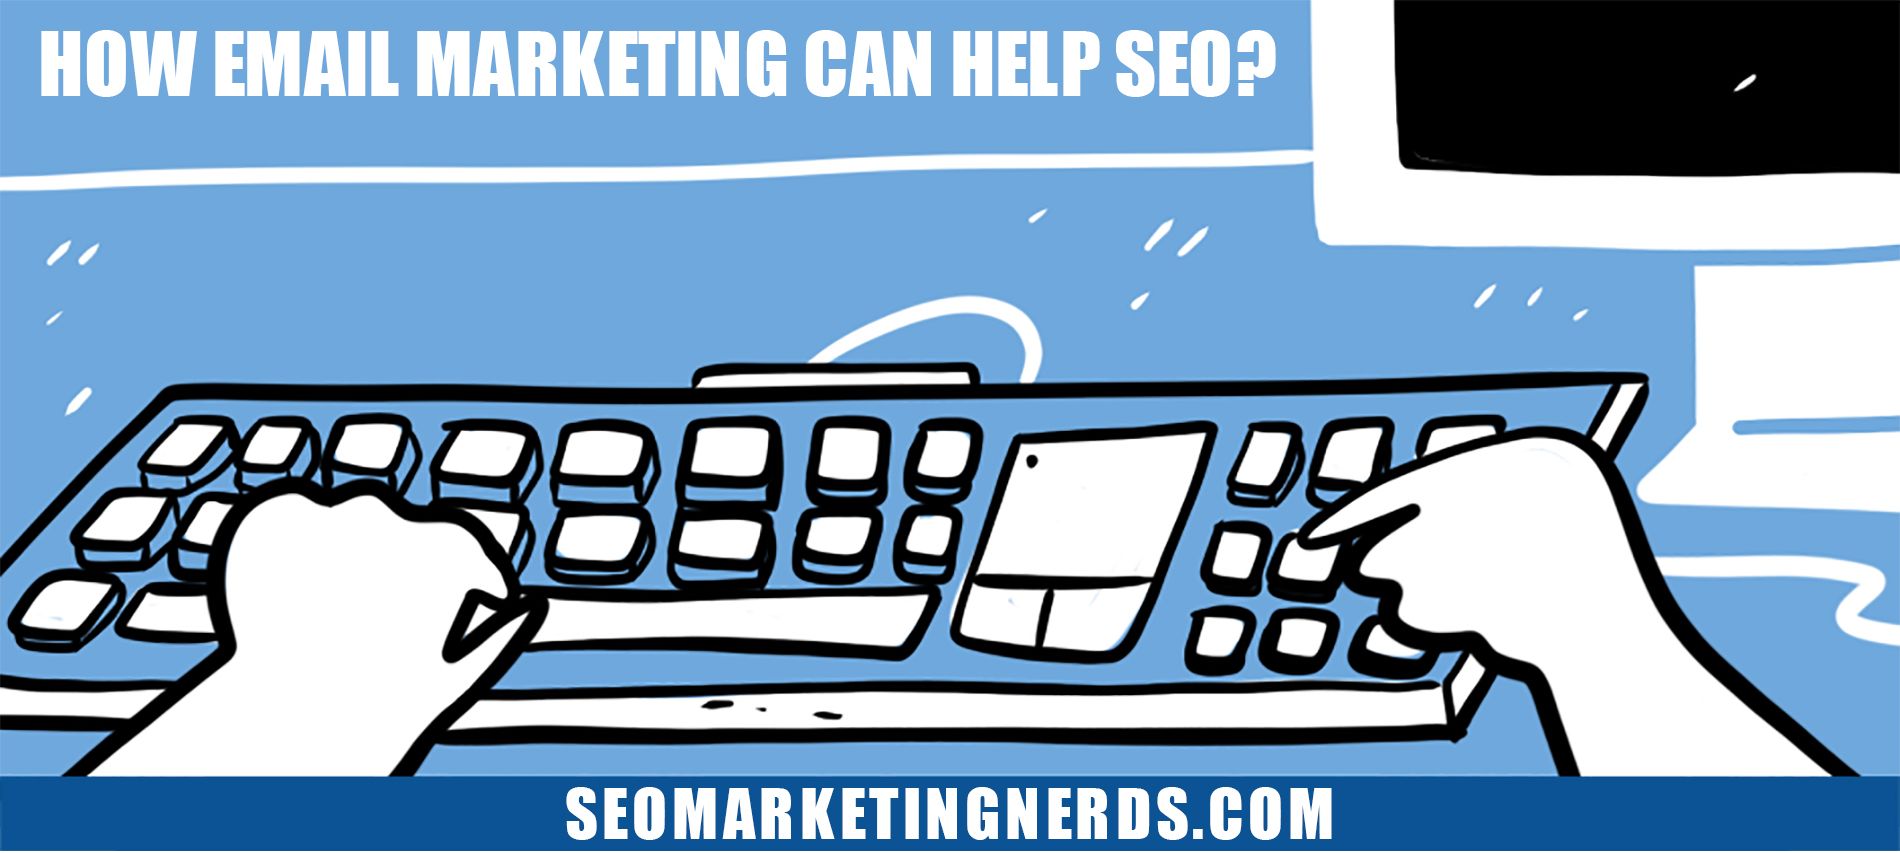 How email marketing can help SEO?